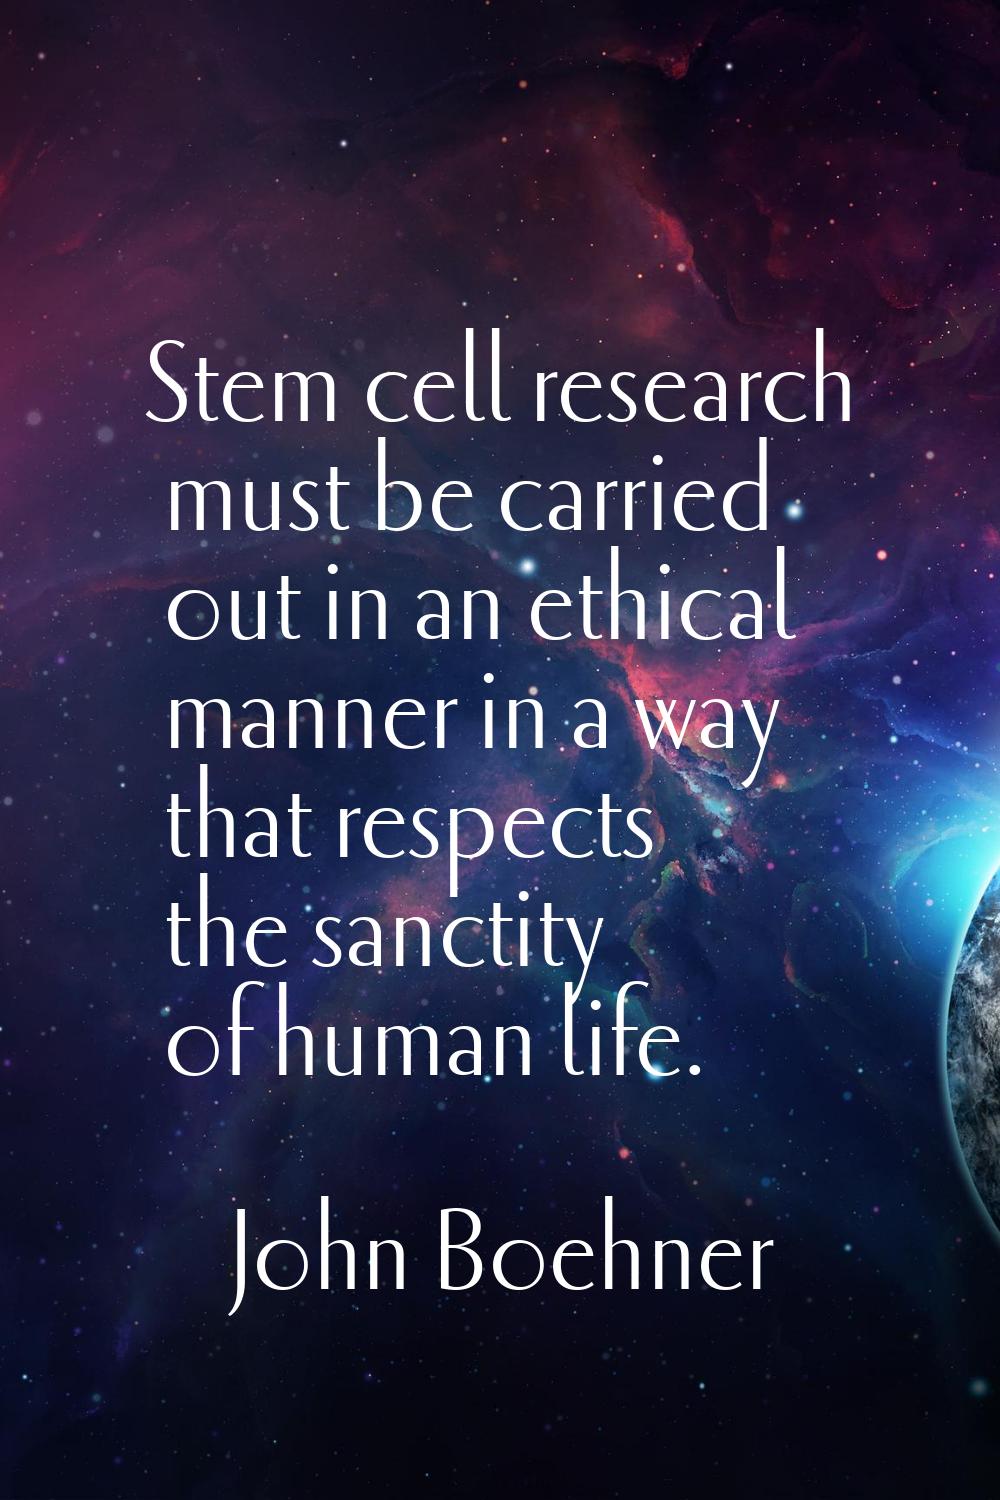 Stem cell research must be carried out in an ethical manner in a way that respects the sanctity of 